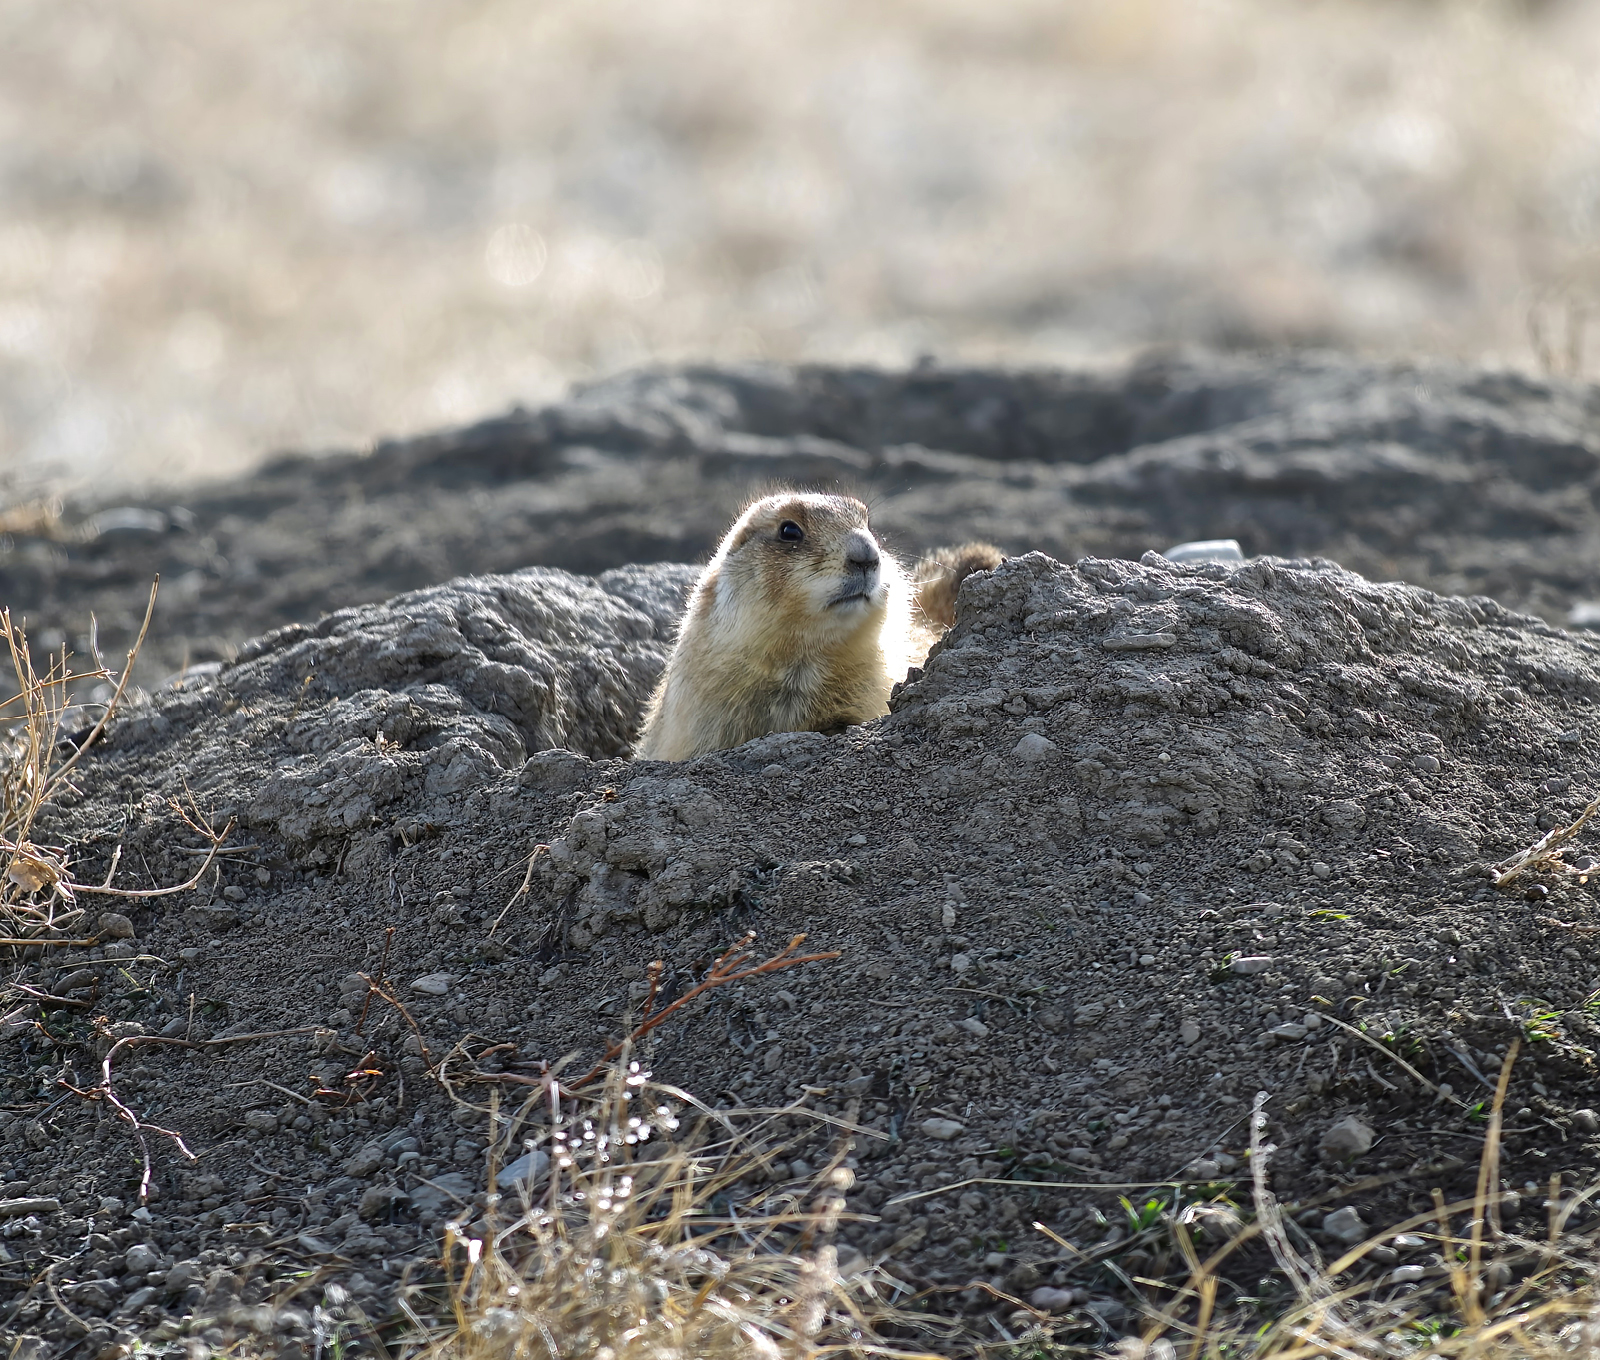 At Home with the Prairie Dog